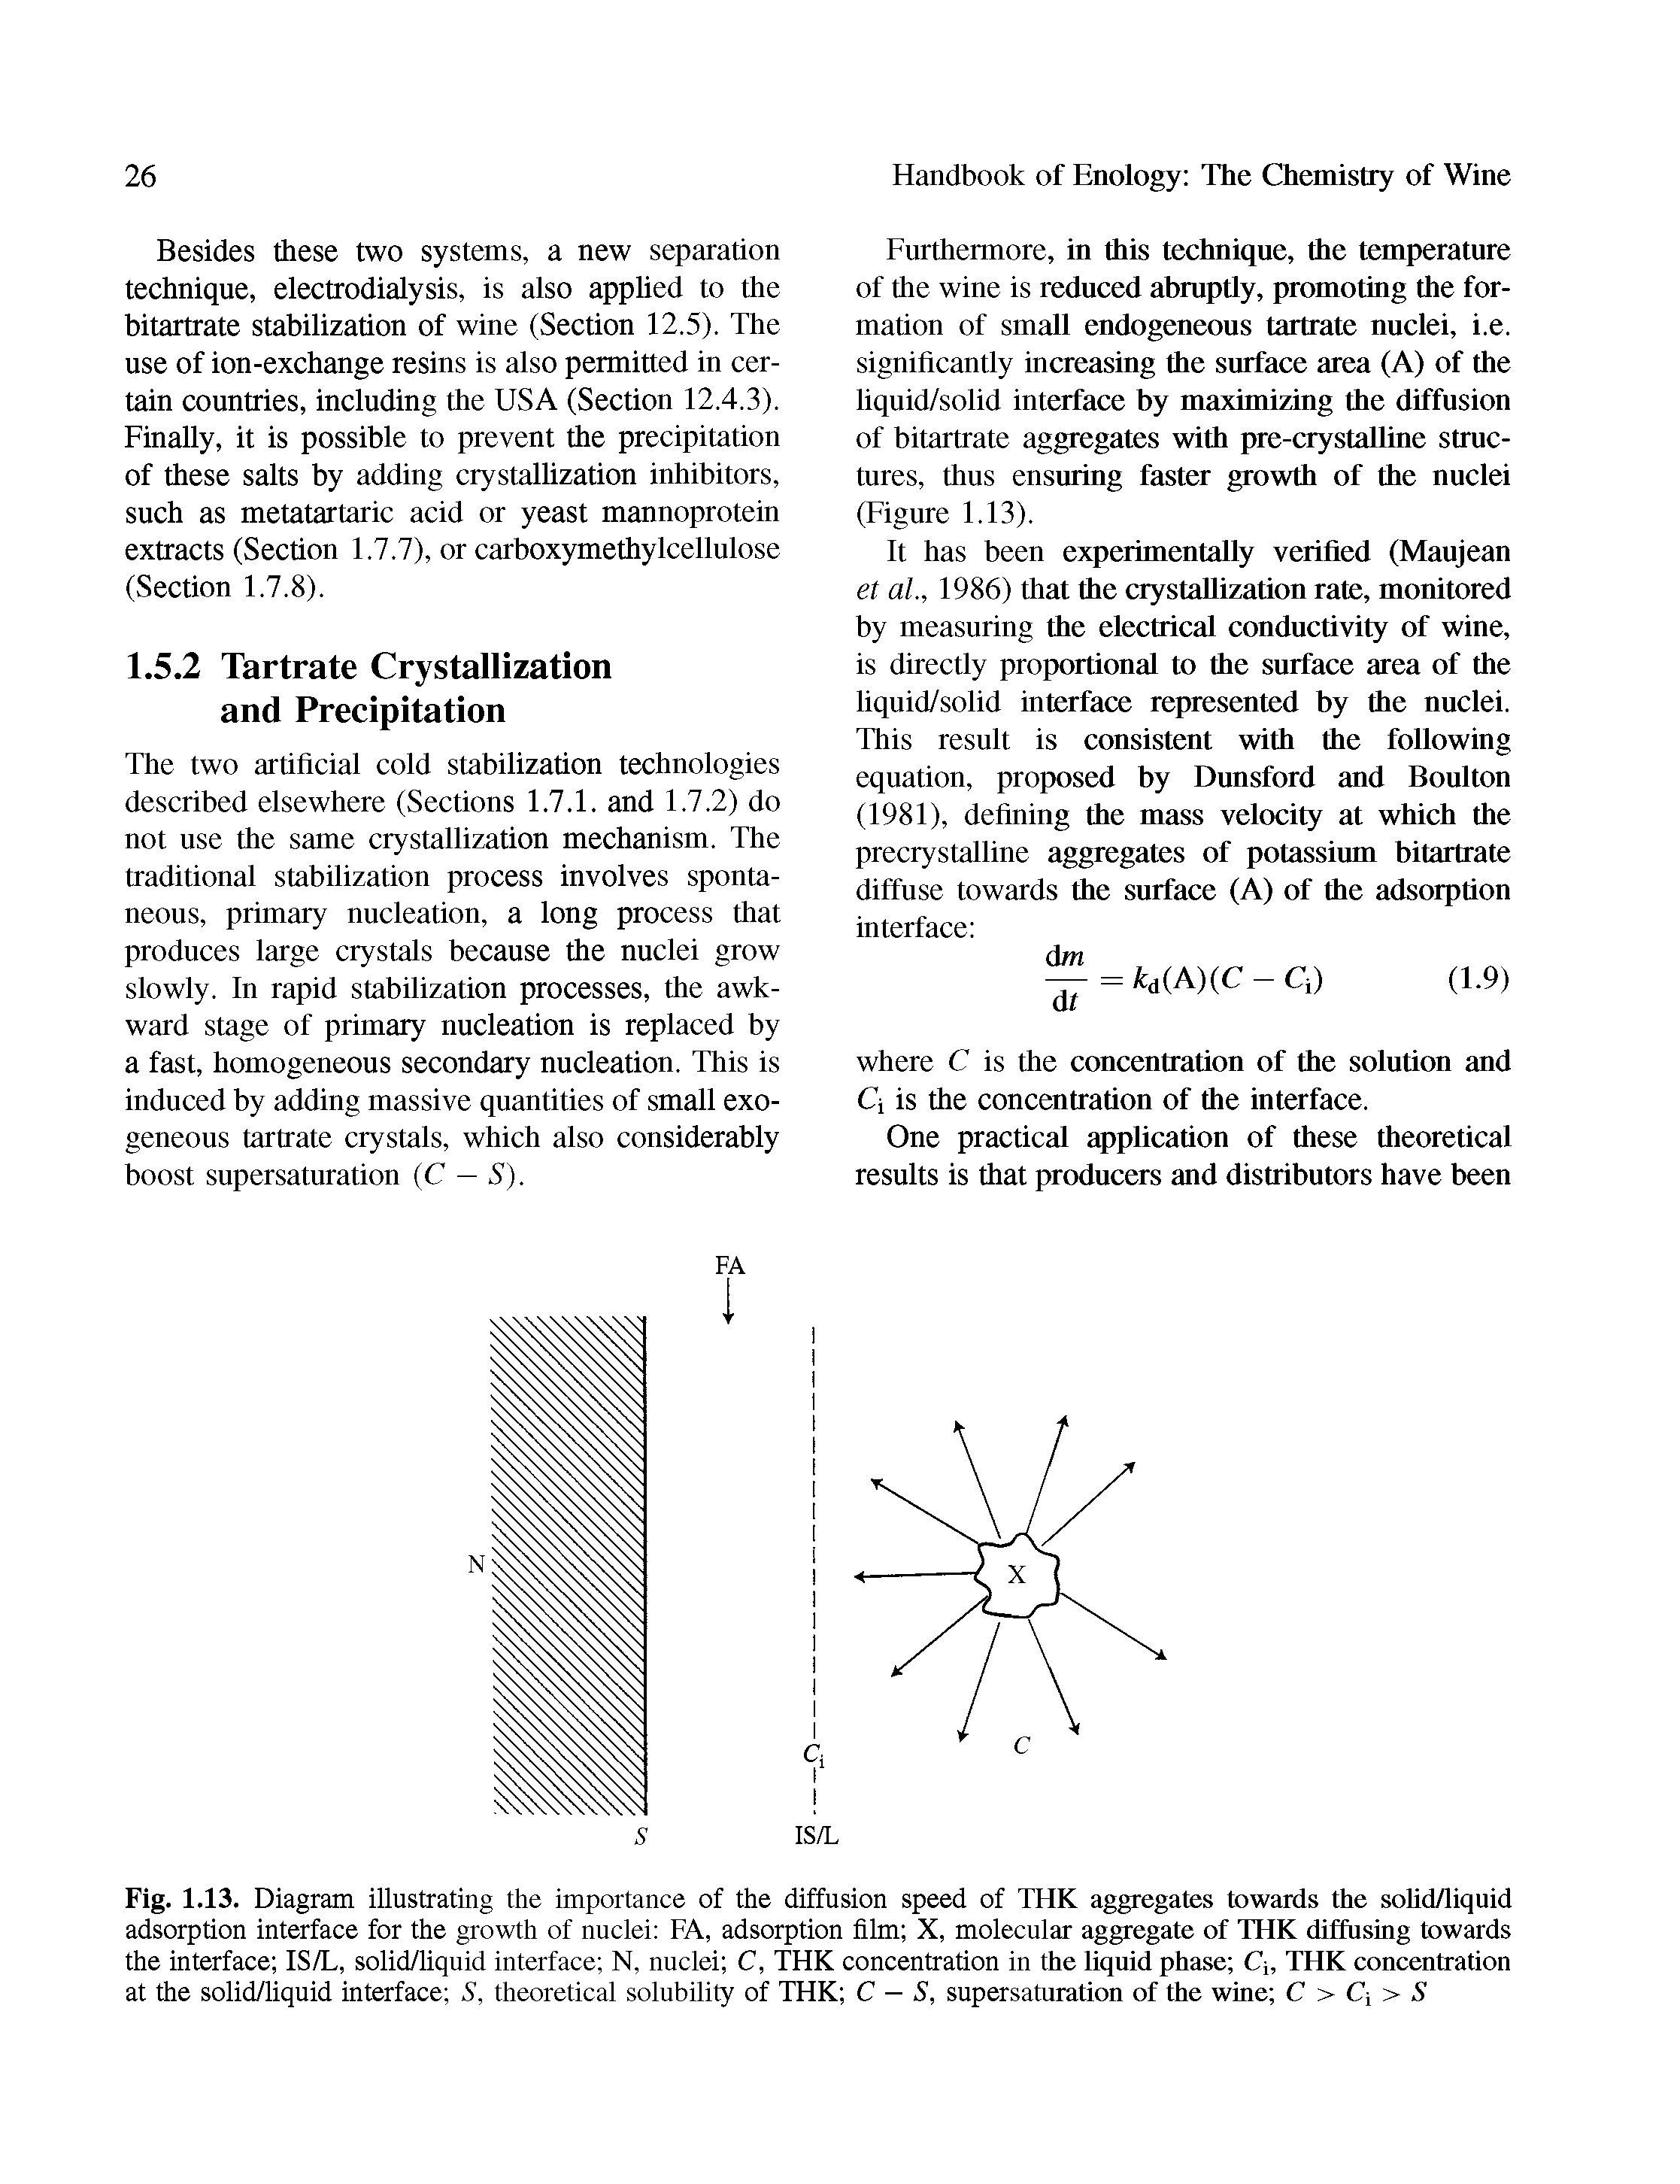 Fig. 1.13. Diagram illustrating the importance of the diffusion speed of THK aggregates towards the soUd/liquid adsorption interface for the growth of nuclei FA, adsorption film X, molecular aggregate of THK diffusing towards the interface IS/L, solid/liquid interface N, nuclei C, THK concentration in the liquid phase Q, THK concentration at the solid/liquid interface S, theoretical solubility of THK C — S, supersaturation of the wine C > > S...